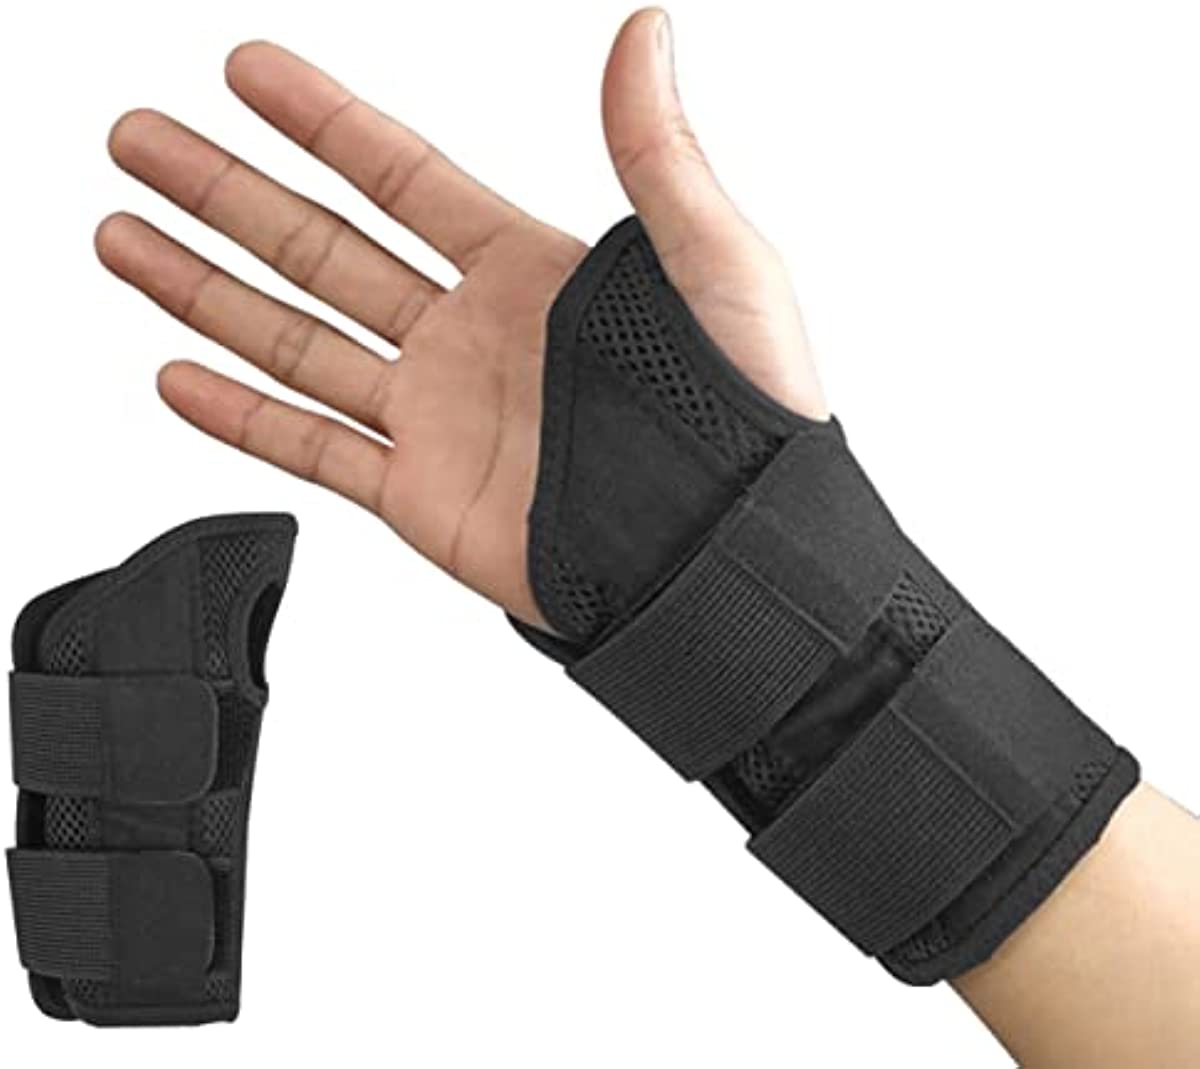 Wrist Brace for Carpal Tunnel Relief Night Support , Hand Brace with 2 Stays for Women Men , Adjustable Wrist Support Splint for Right Left Hands for Tendonitis, Arthritis , Sprains (Large/X-Large (Pack of 1), Right Hand-Black)